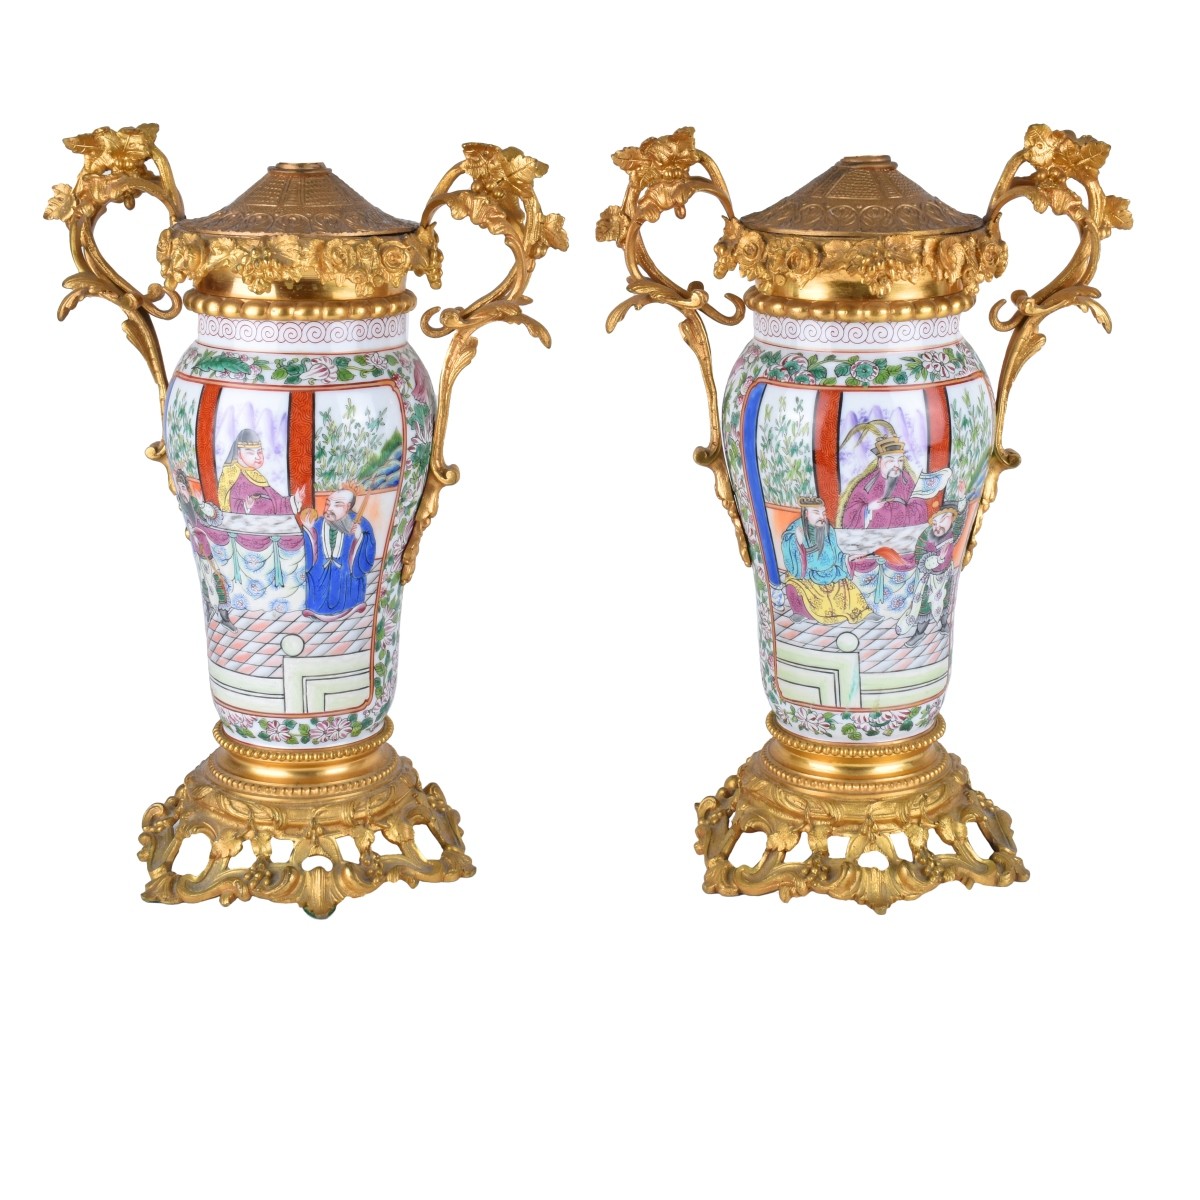 A Pair of Chinese Export Porcelain Vases as Lamps